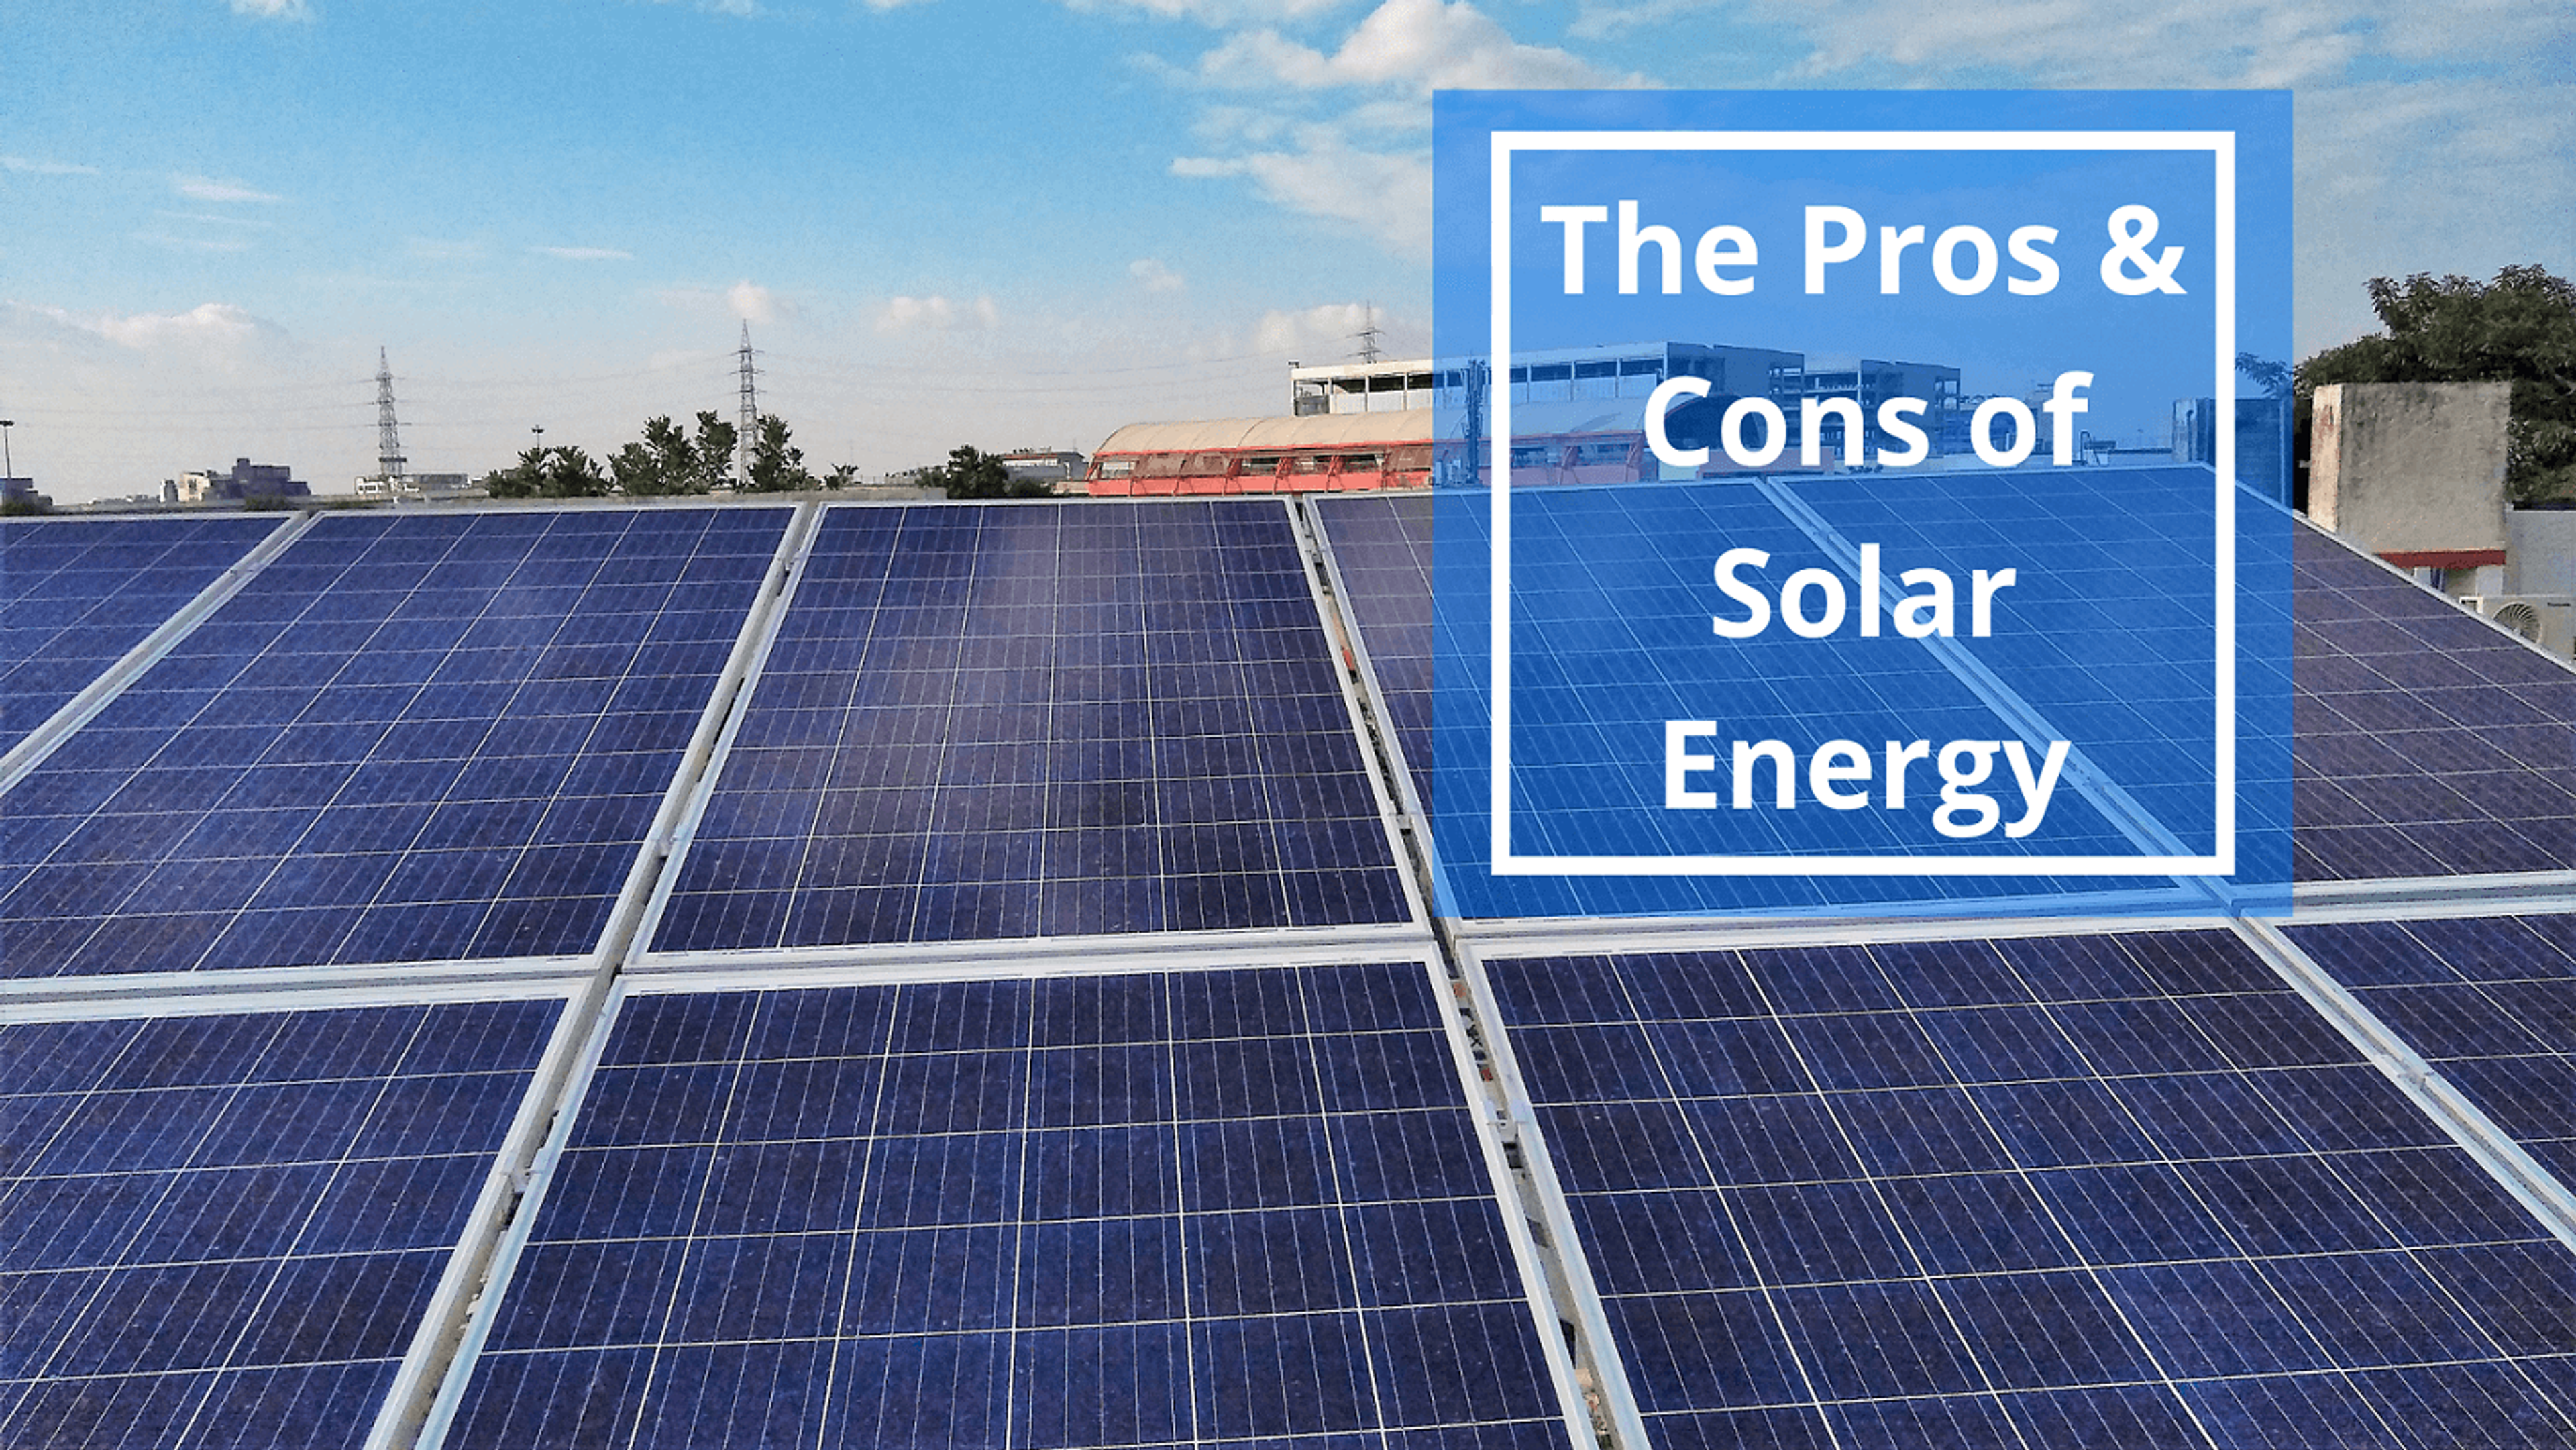 The pros & cons of solar energy